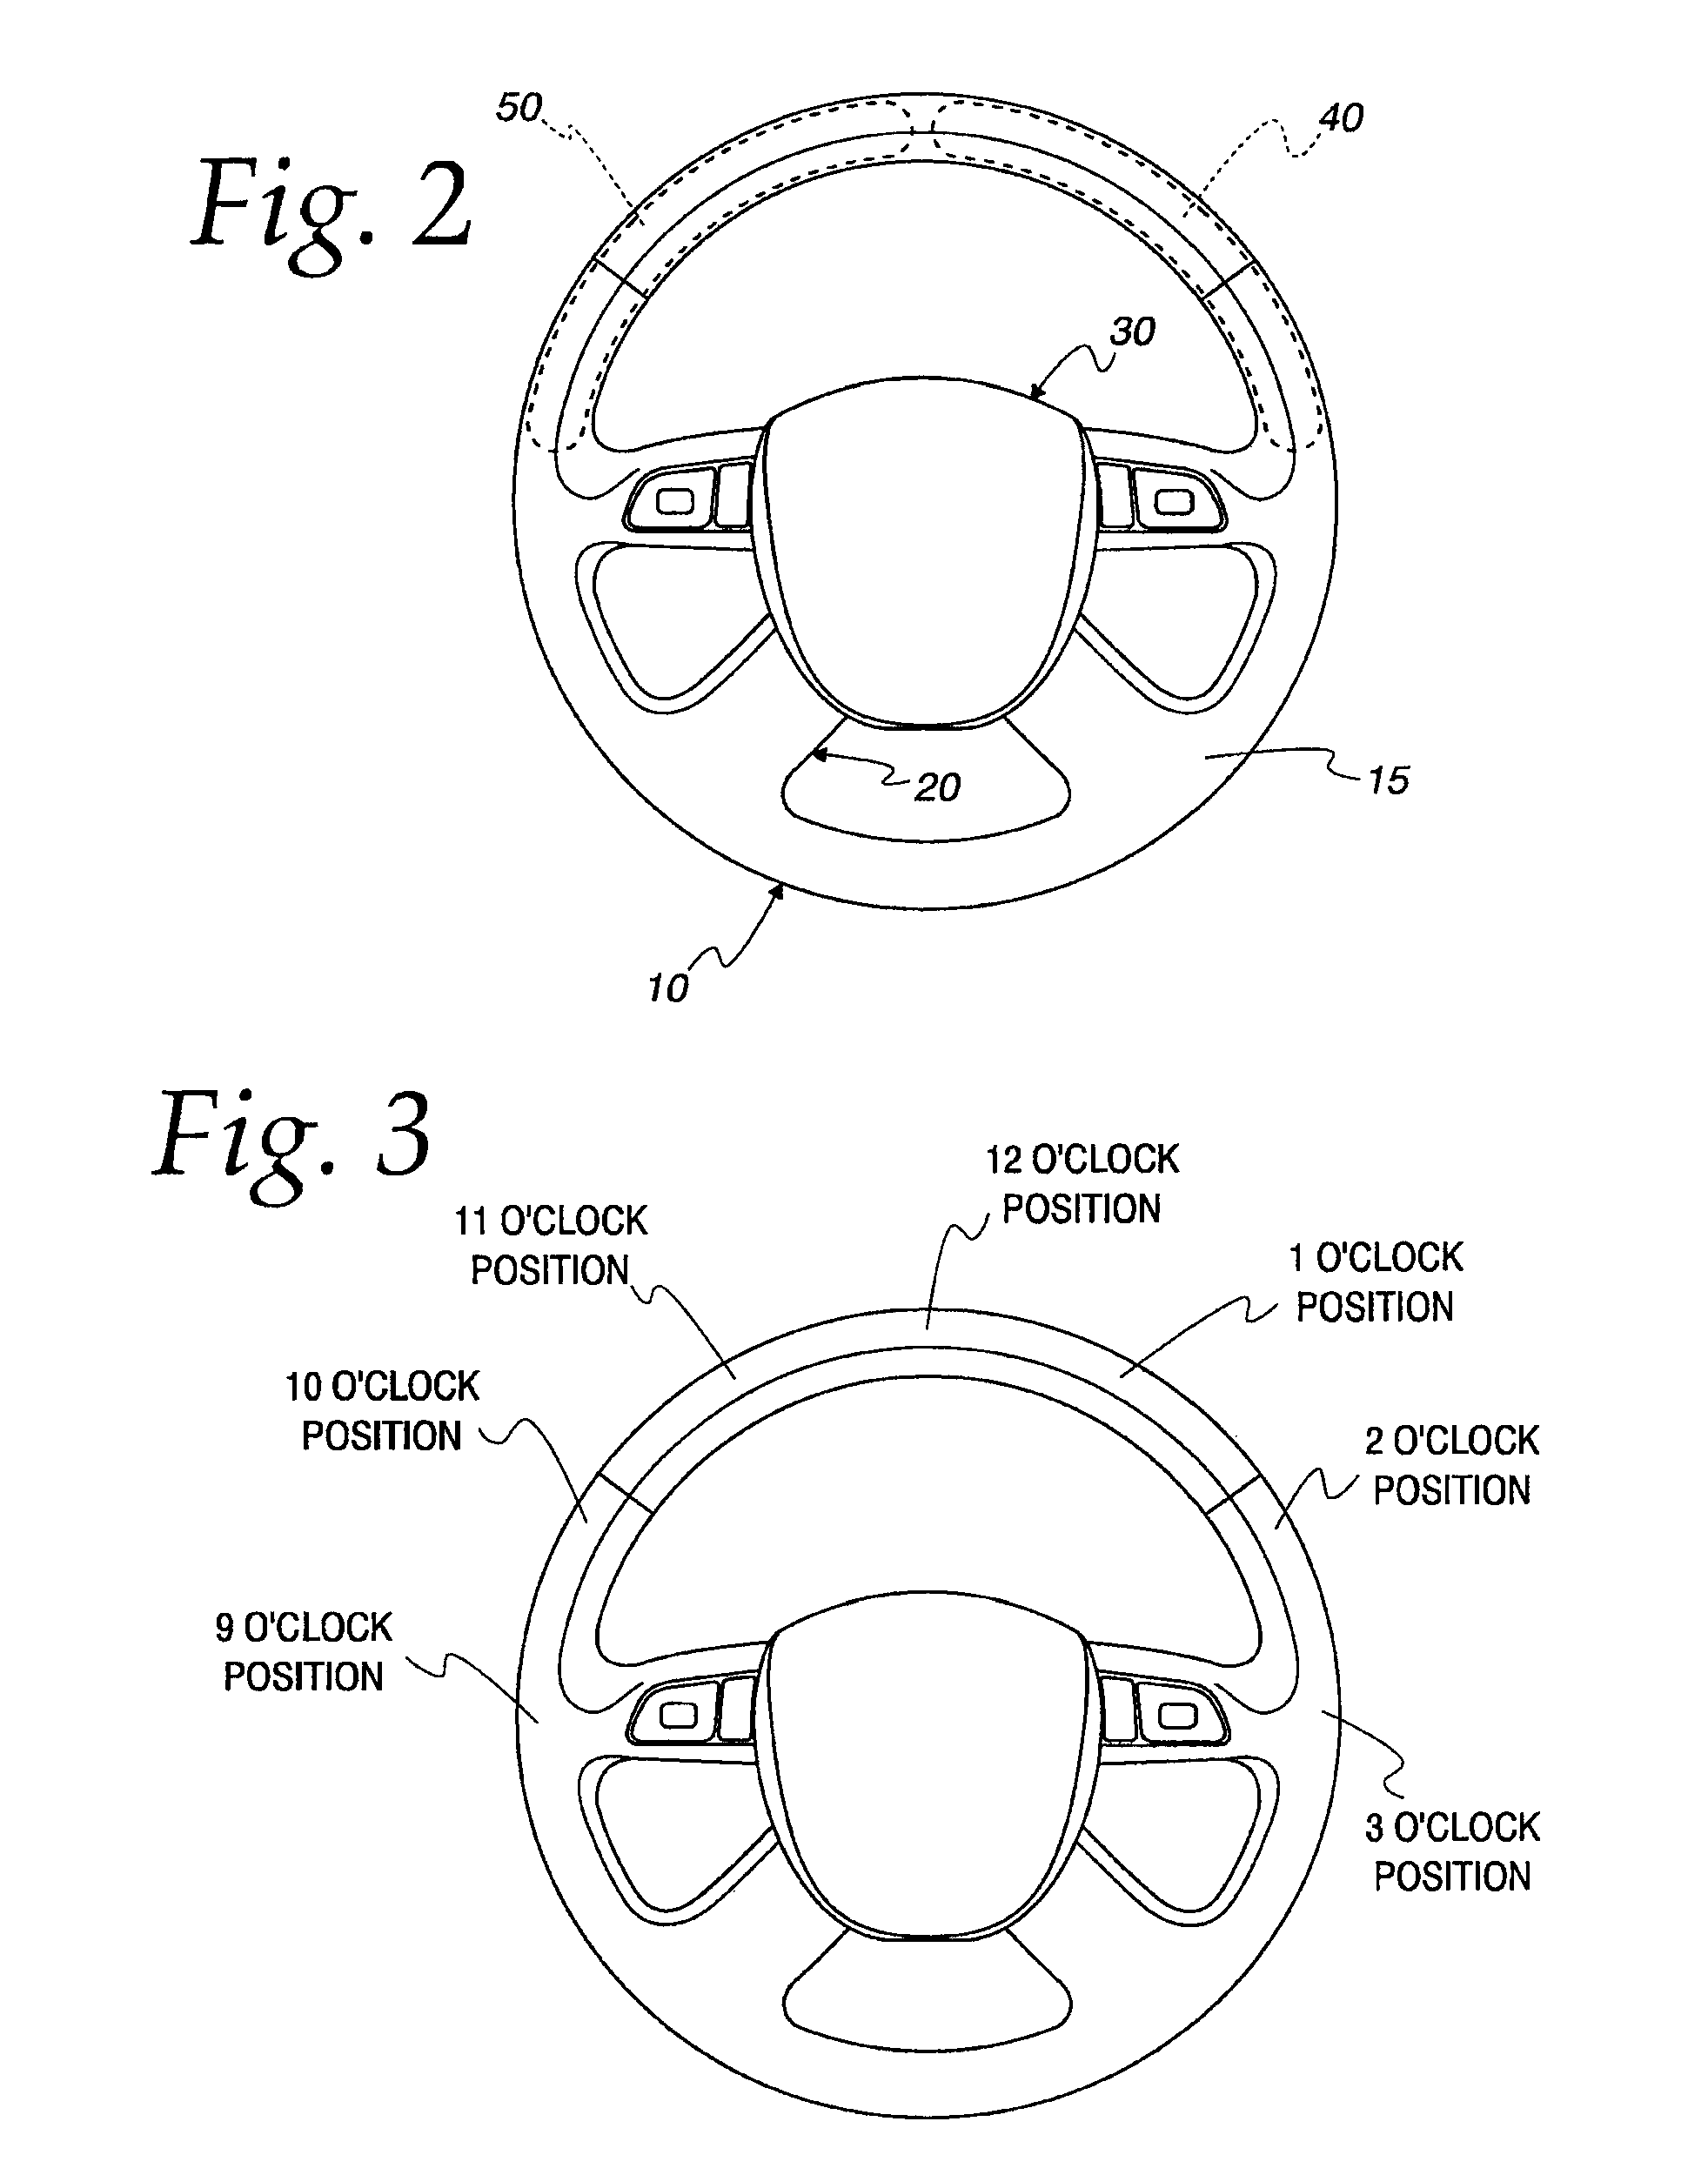 Integrated vehicle turn signal system and apparatus